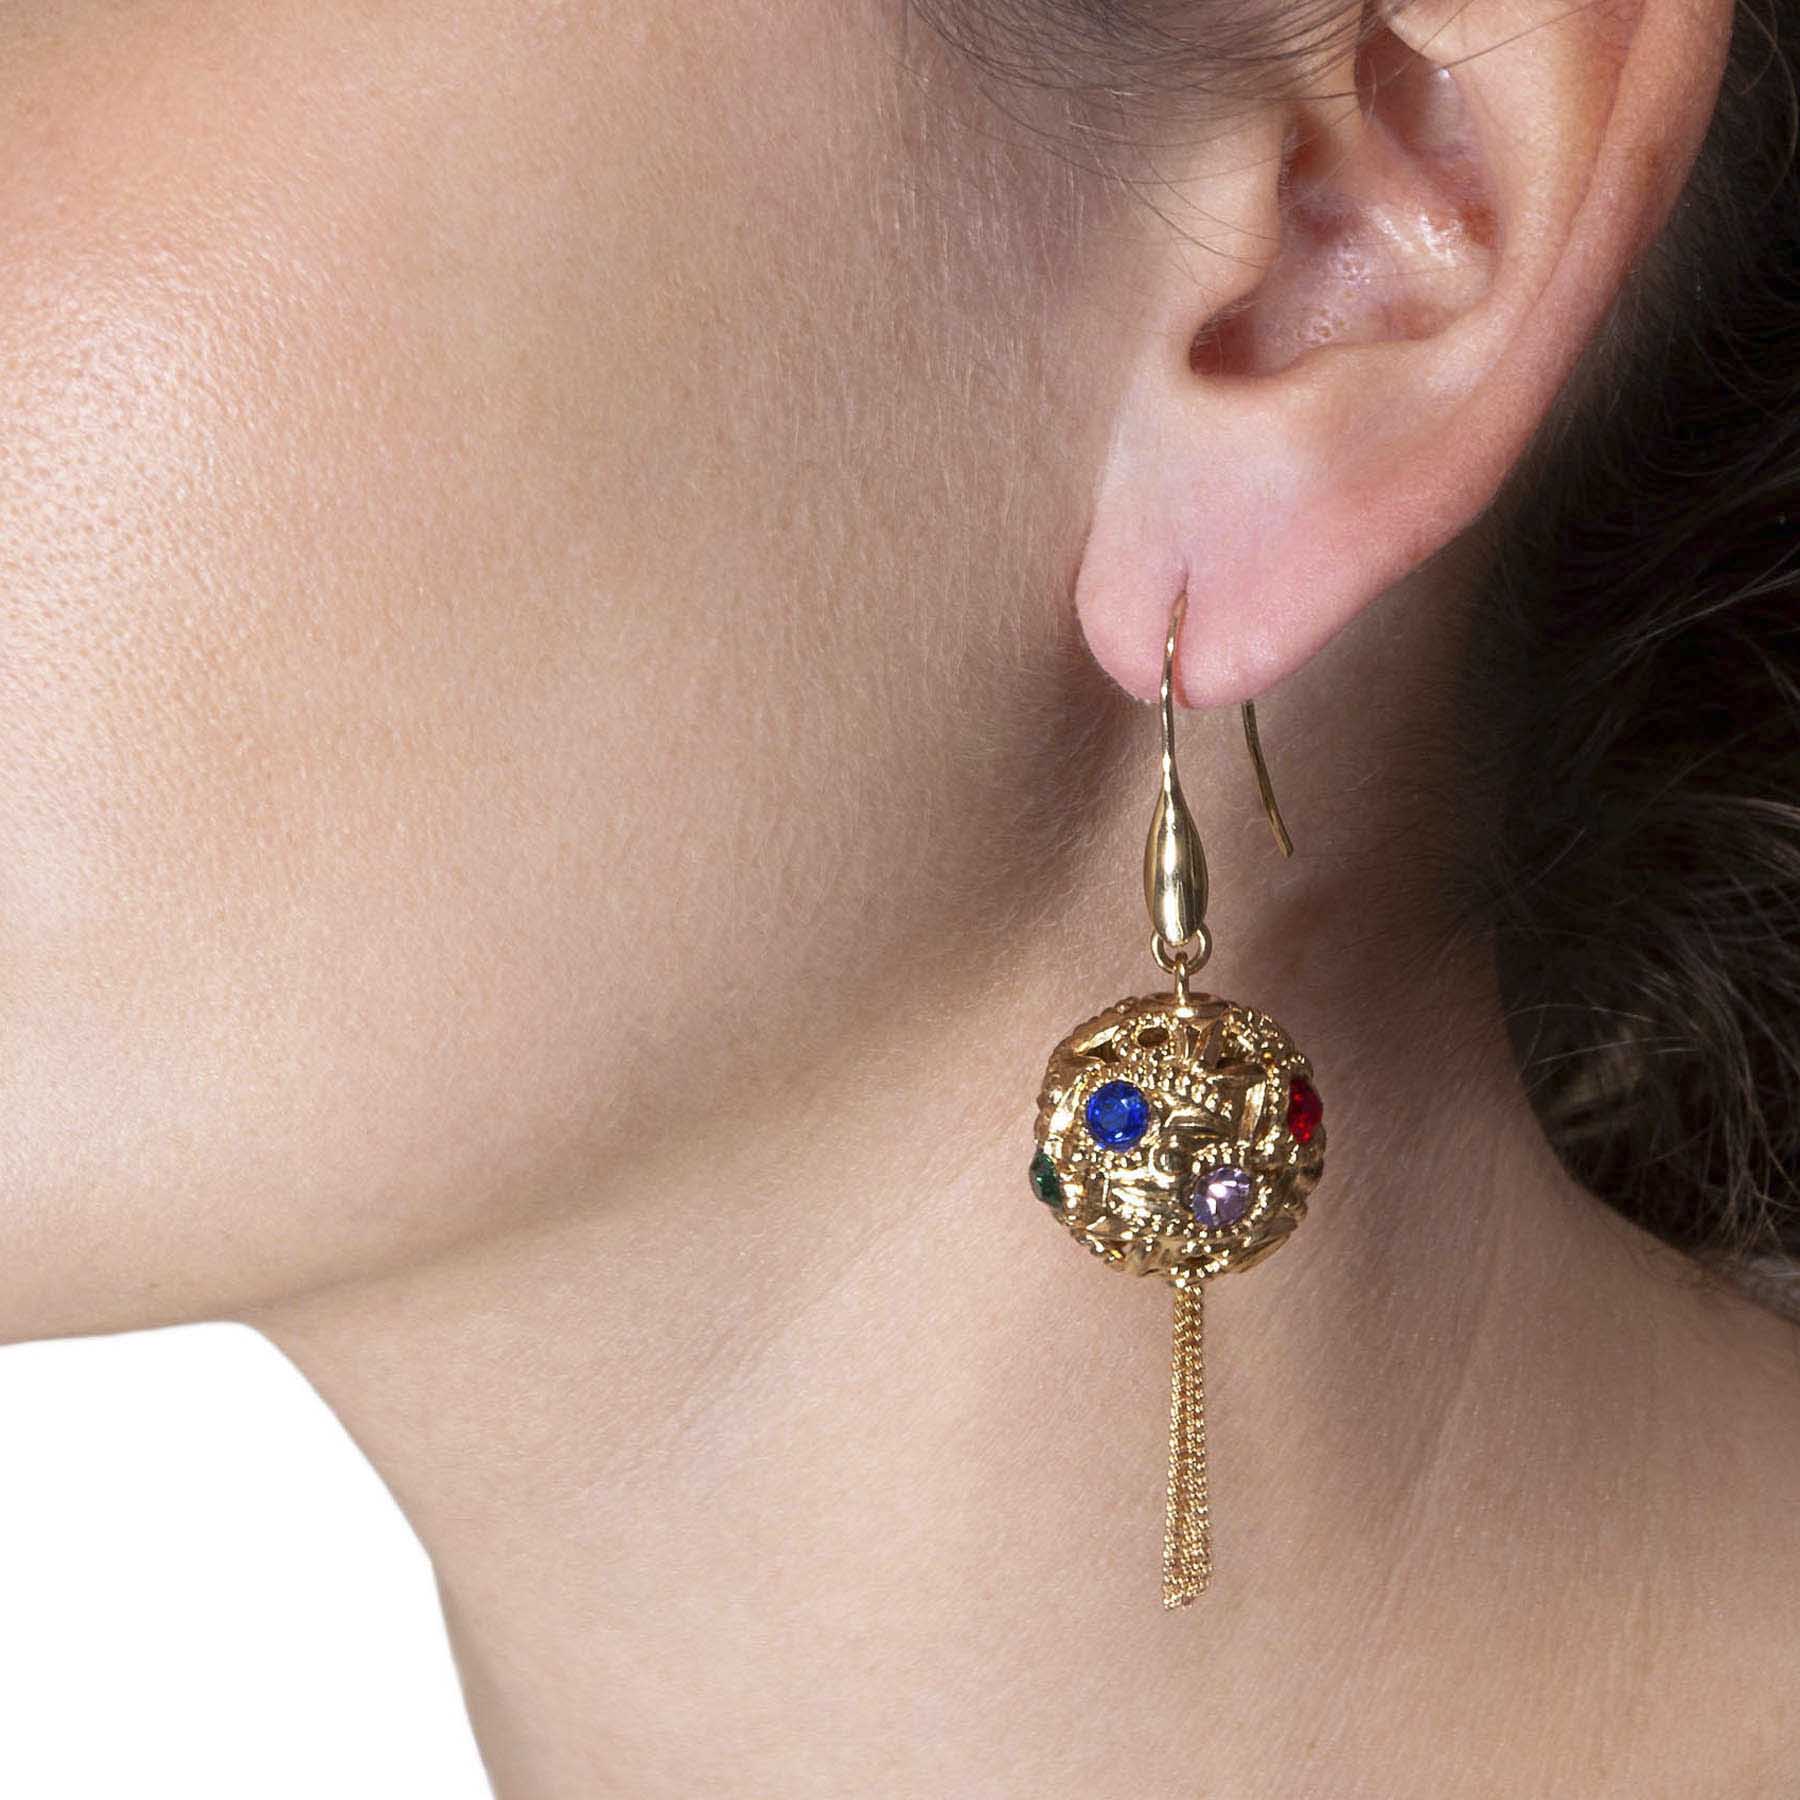 Dangle earrings with light points